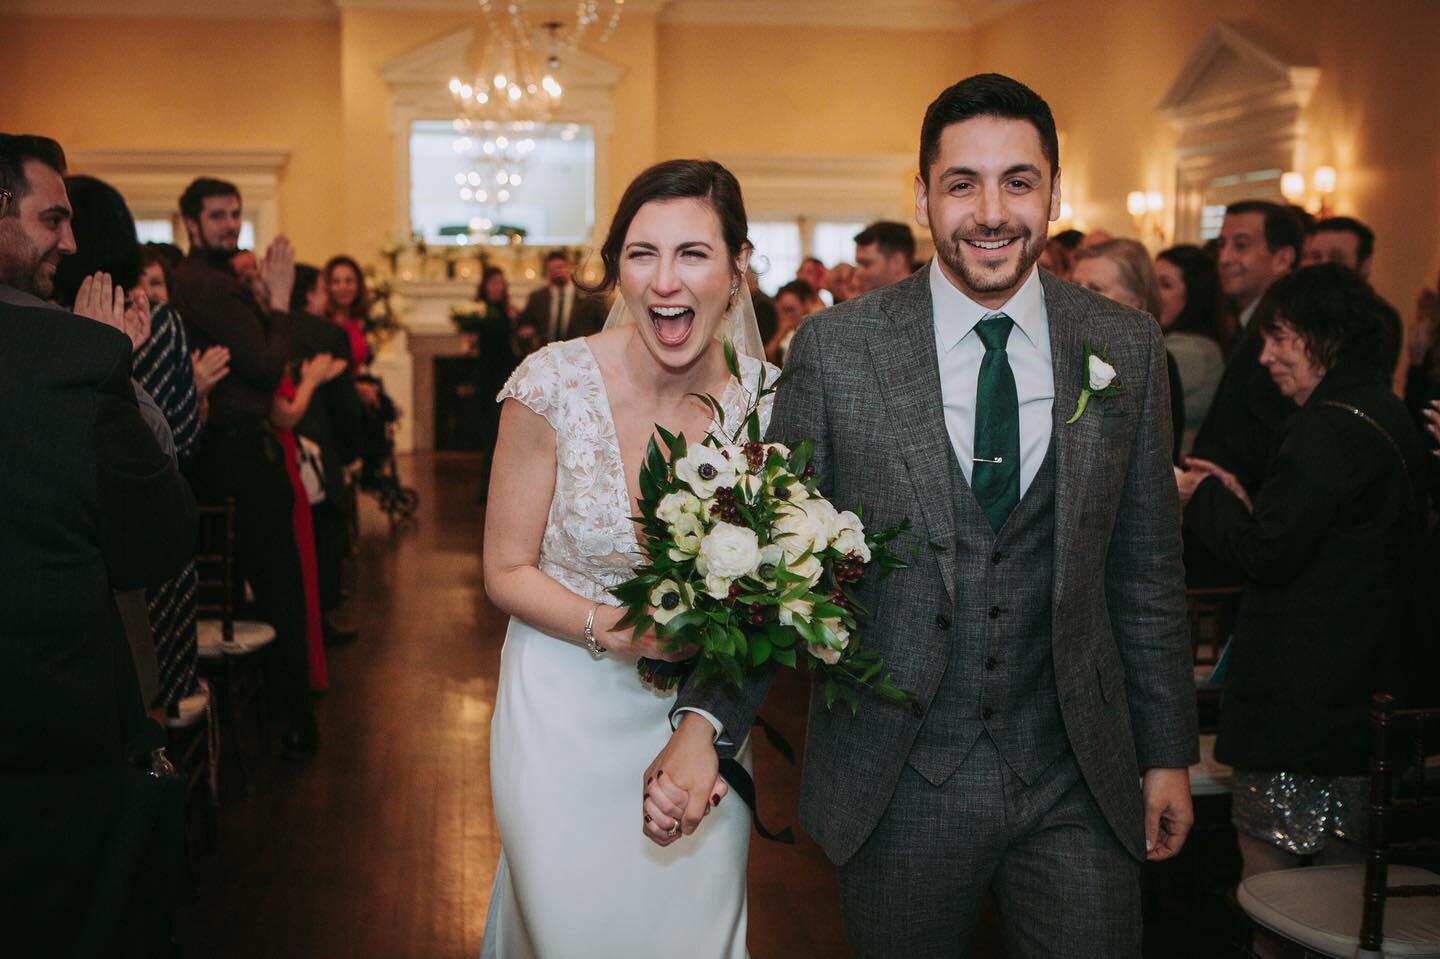 My friends @han_mchale and @picklednick90 got married this weekend and I had the honor of capturing the day for them 🥰 These were the expressions on their faces from start to finish